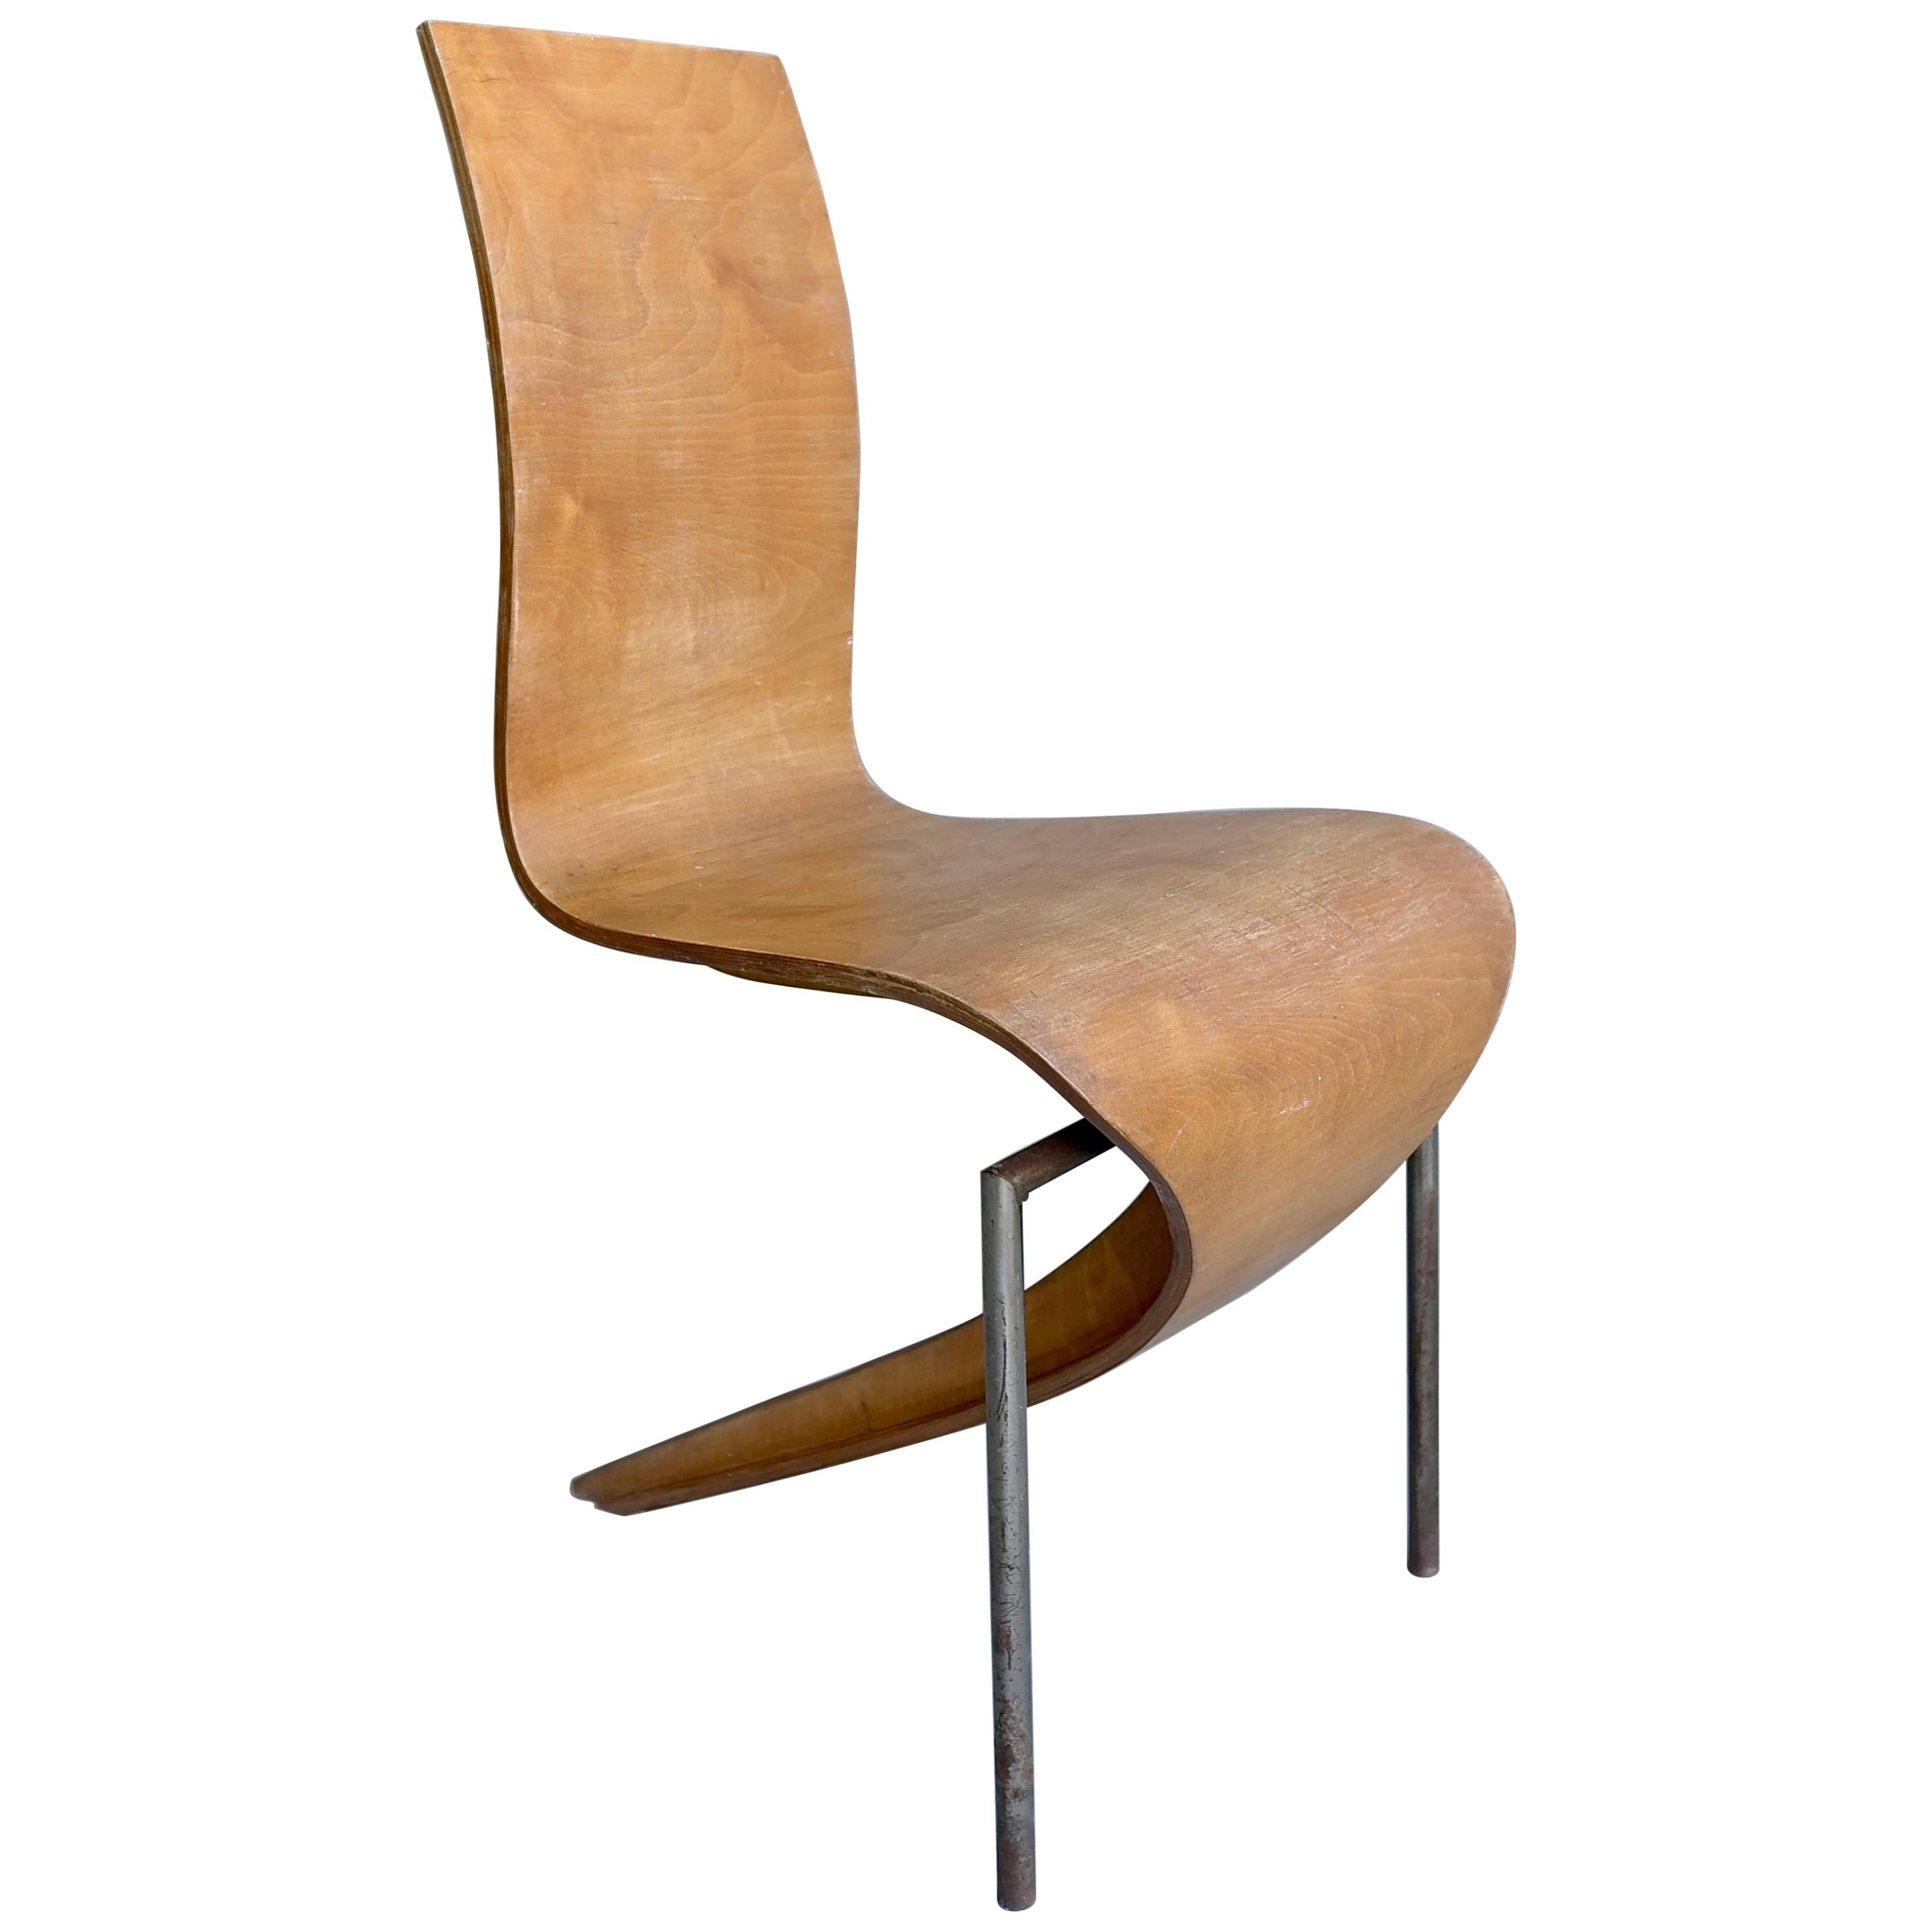 Sculptural Mid-Century Modern French Side Chair, in Style of André Bloc